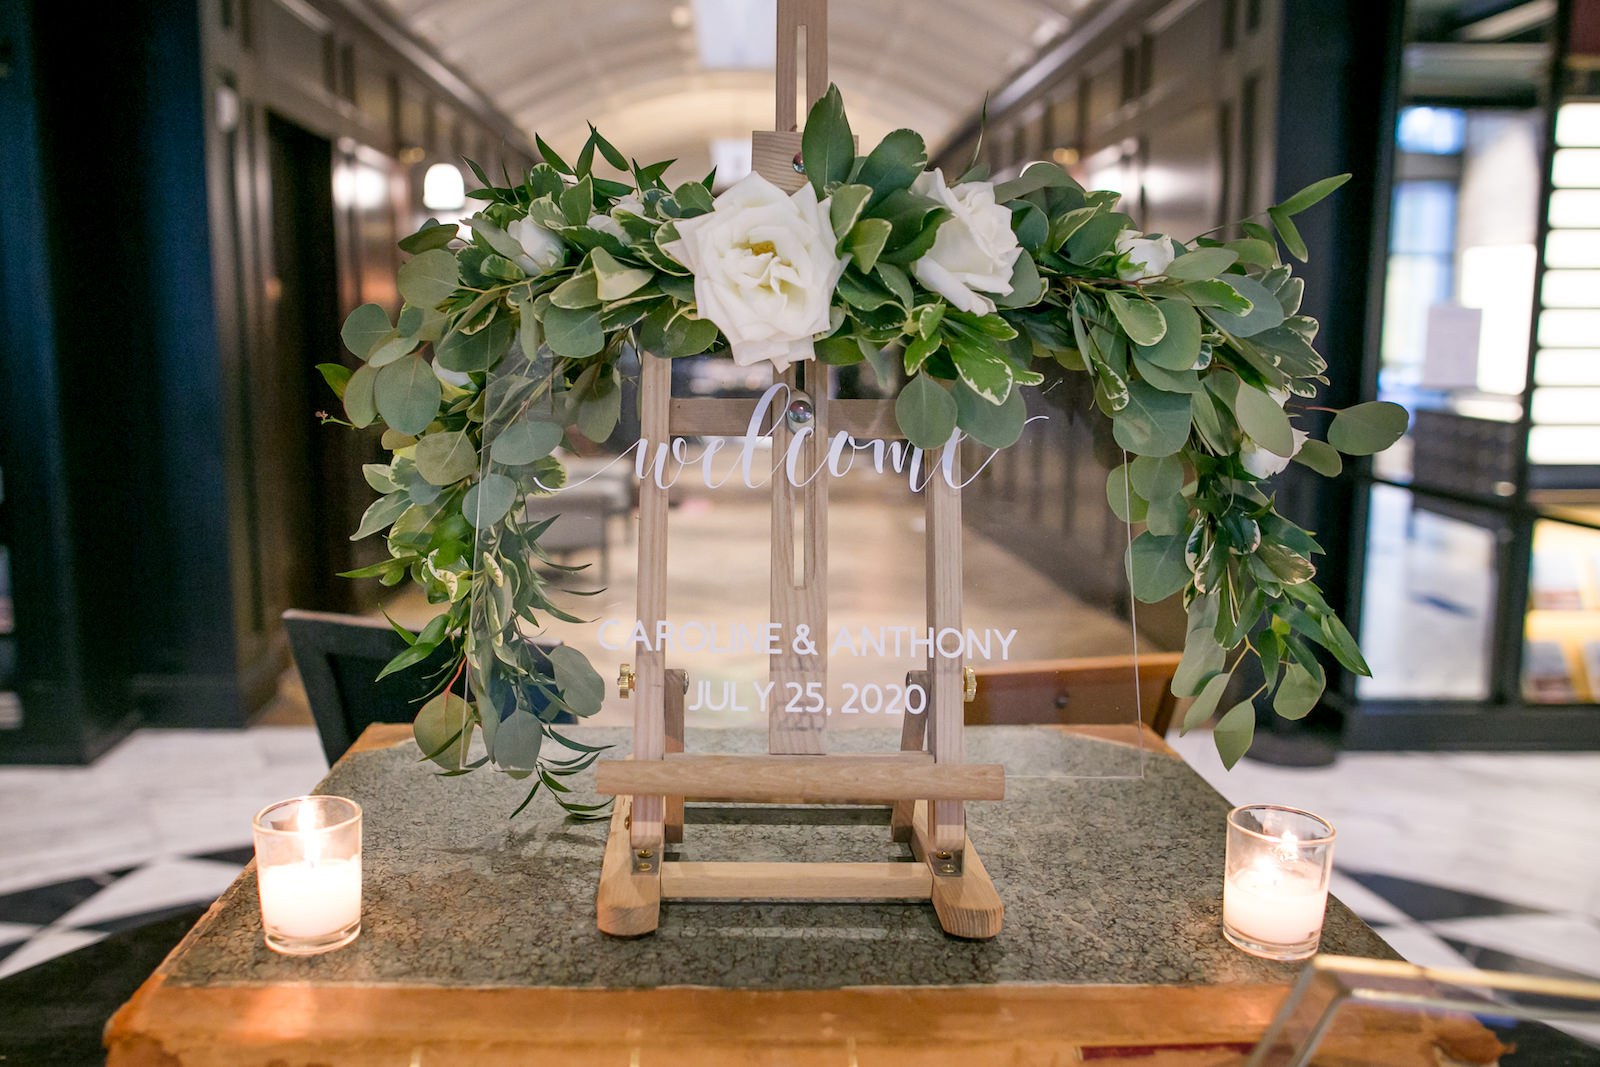 Wedding Welcome Sign Acrylic Clear with White Calligraphy on Wood Easel with Greenery Garland